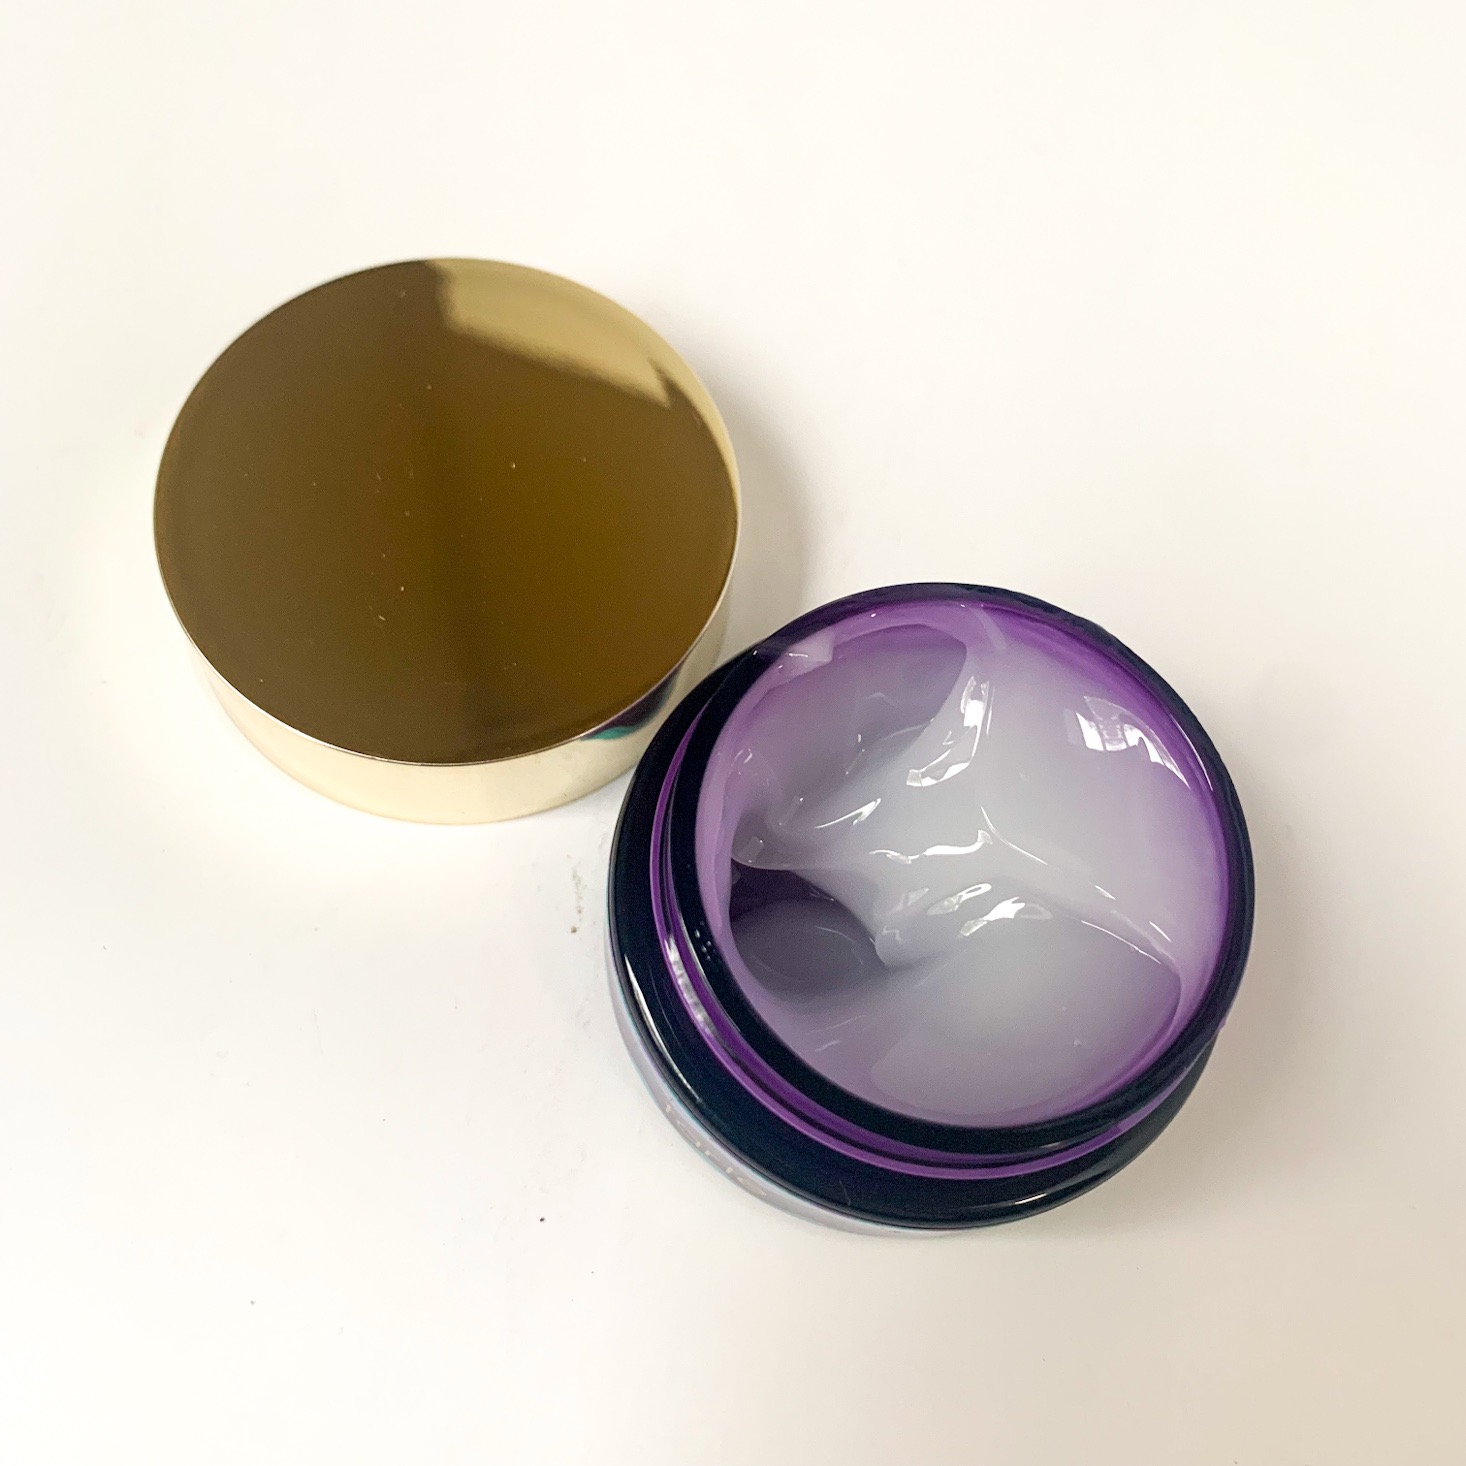 tarte Mystery Mixup Discovery Set Review - December 2019 | MSA